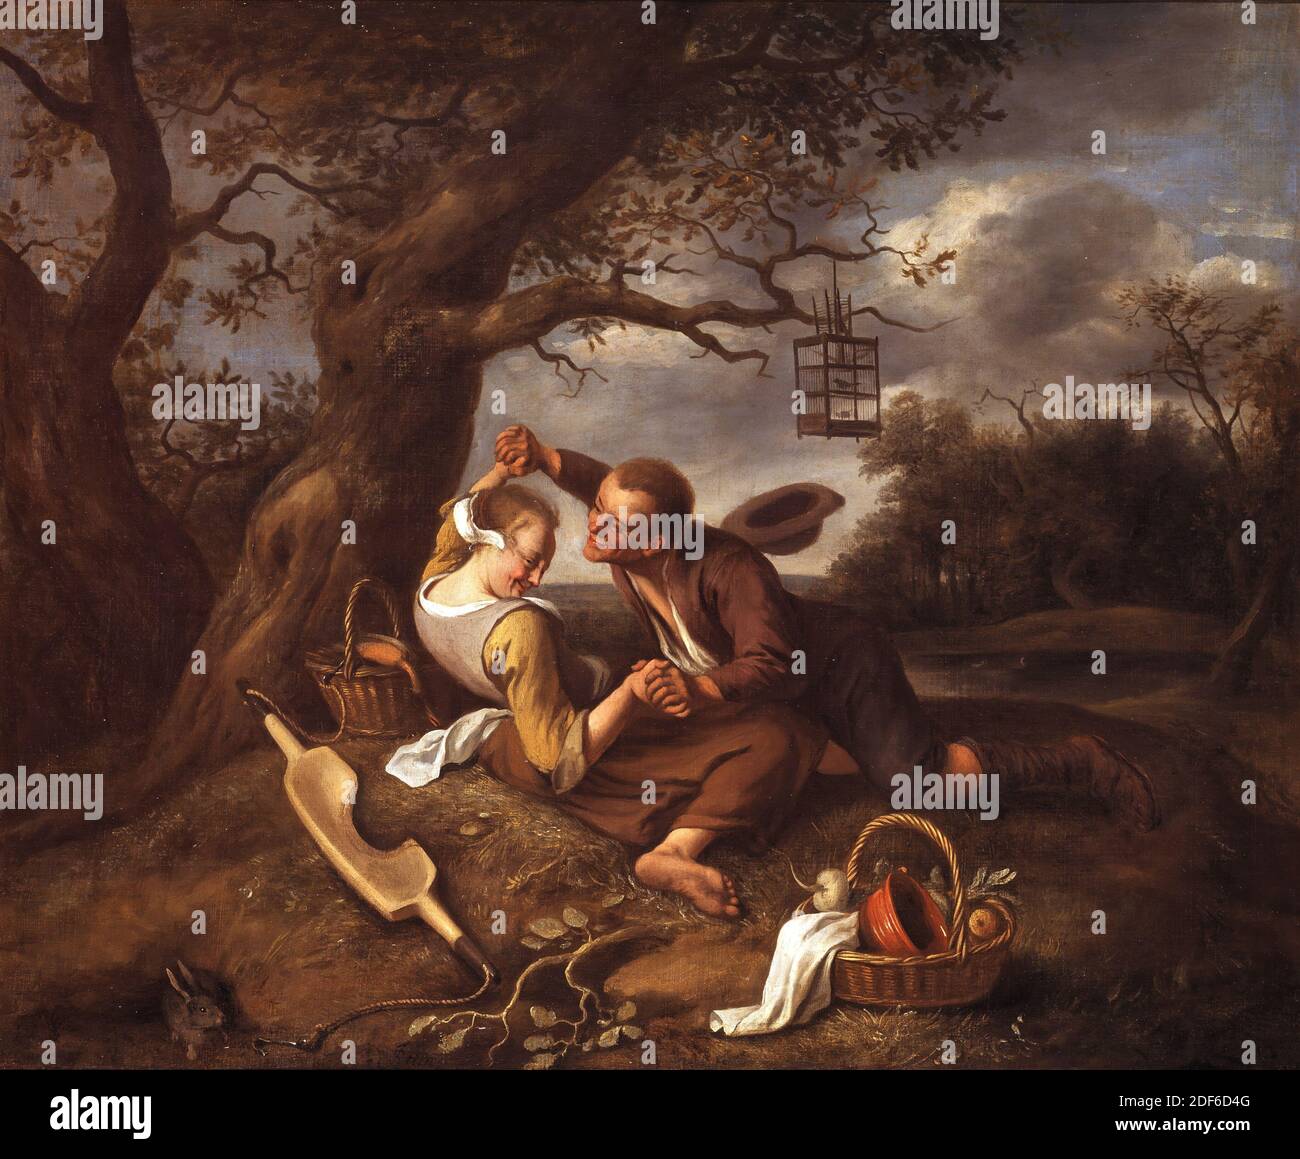 painting, Jan Steen, c. 1660, Signature front, bottom left, under yoke: JSteen (JS in one), canvas, oil paint, painted, General (dimensions according to catalog 1983): 65.5 × 80cm (655 × 800mm), With frame: 83.5 × 99 × 5.5cm (835 × 990 × 55mm), girl, landscape, rabbit, genre, boy, tree, Silver token from the bailiff of the former district court in Leiden. The medal is round in shape with a ring on the front: stamped the coat of arms of the Netherlands with the caption: KONINGRYK DER NEDERLANDEN On the back: Engraved the inscription: ARRONDISSEMENTS REGTBANK TE LEYDEN Stock Photo